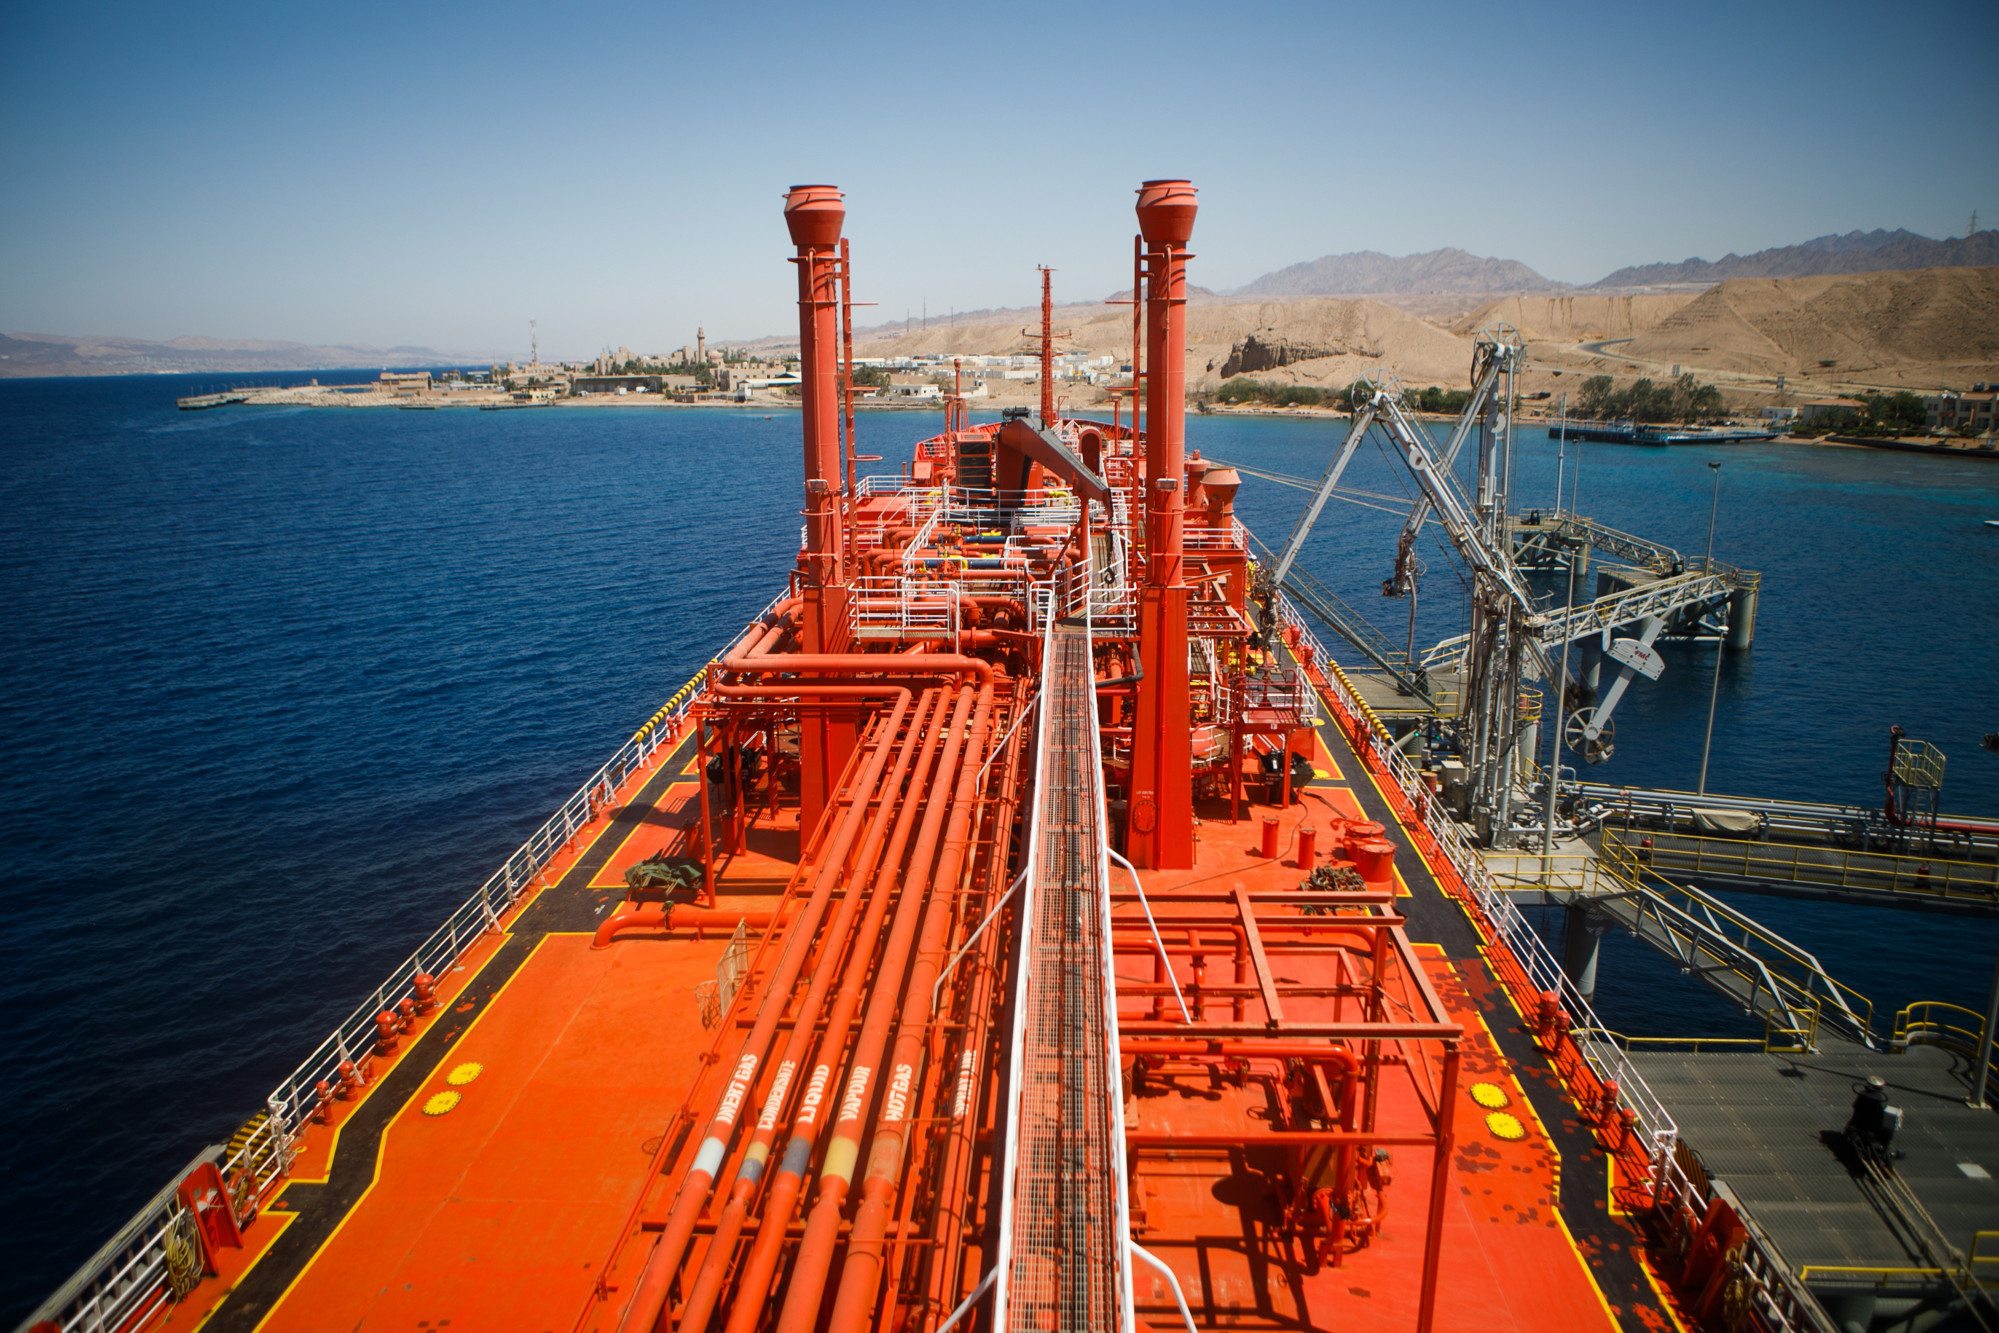 The 'Eugenia Gas' liquefied petroleum gas (LPG) tanker sits beside fuel transfer pipes at a terminal at Aqaba port, operated by Aqaba Development Corp., in Aqaba, Jordan, on Wednesday, April 11, 2018. Both the liquefied natural gas (LNG) and the LPG terminals were developed to secure the supply of gas resources after the disruption in Egyptian natural gas imports in 2010. Photographer: Annie Sakkab/Bloomberg